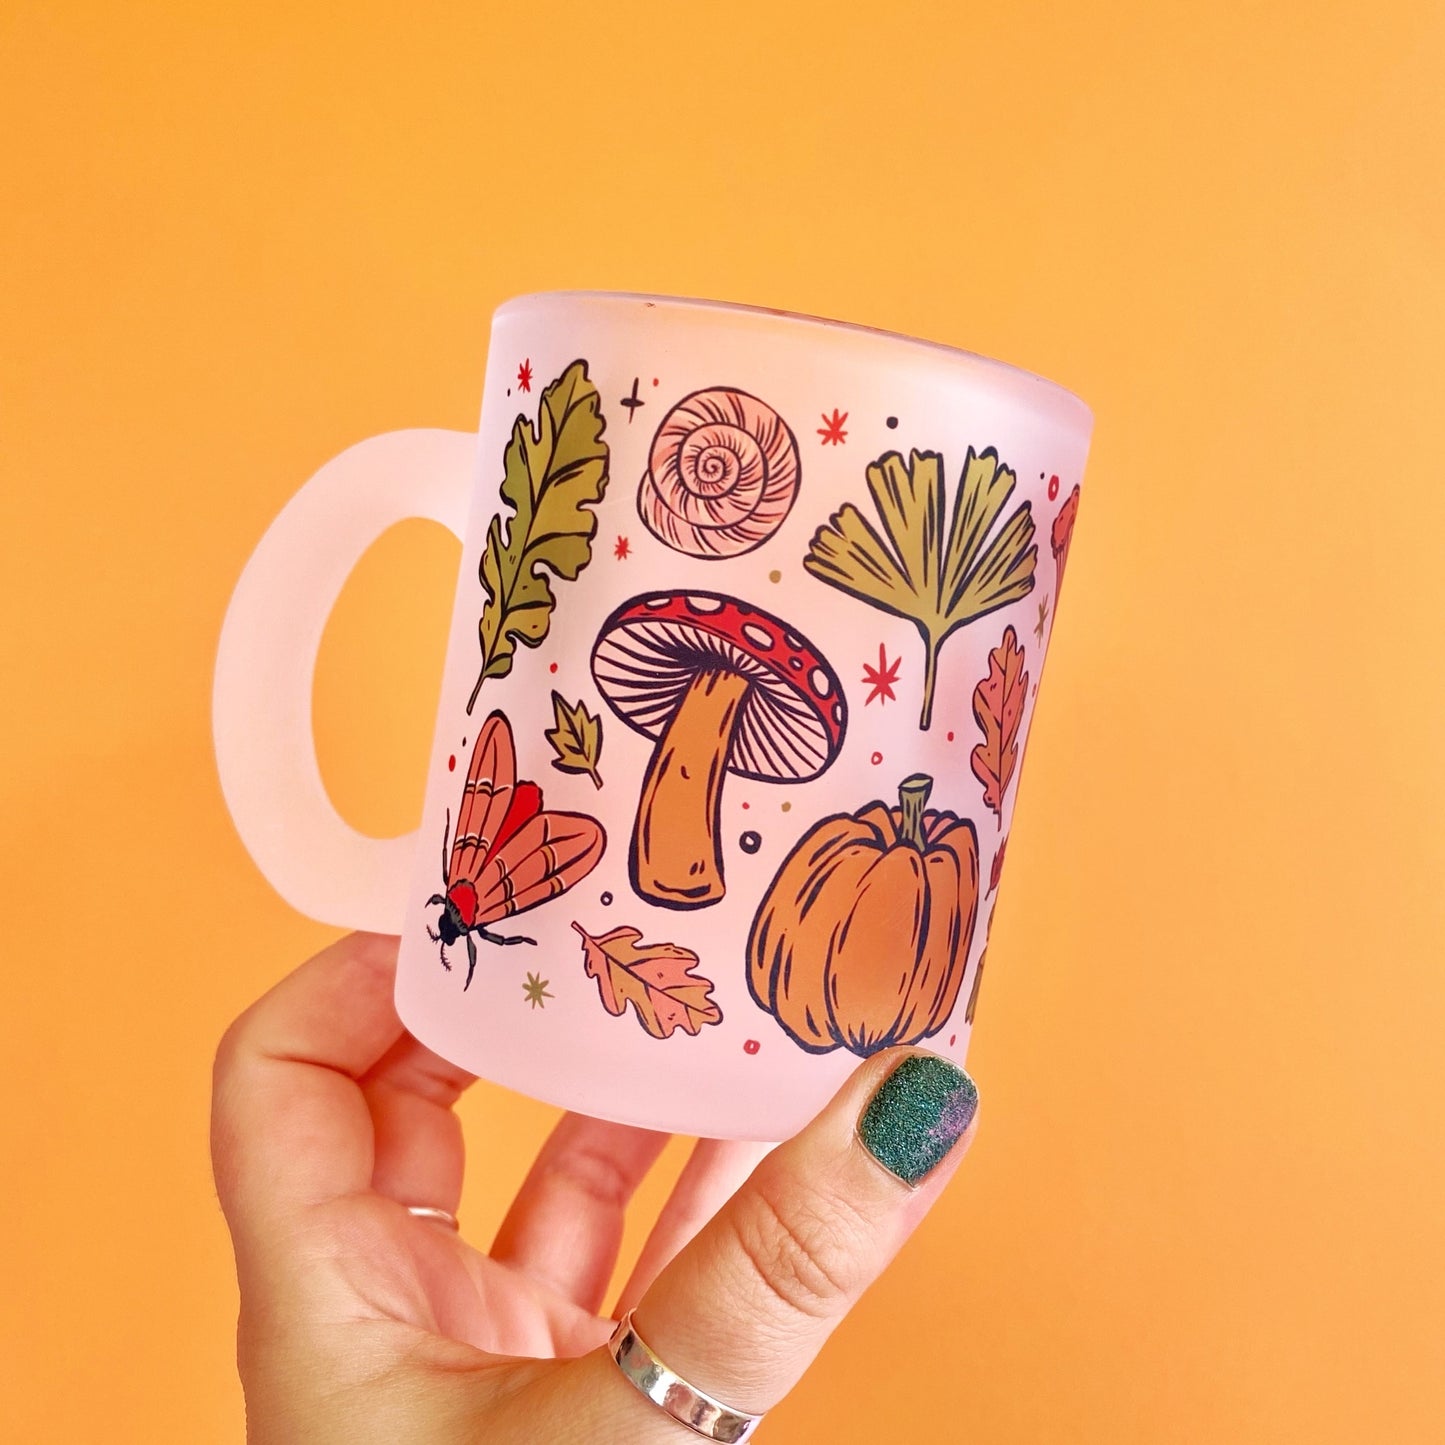 Frosted Glass Autumn Mug